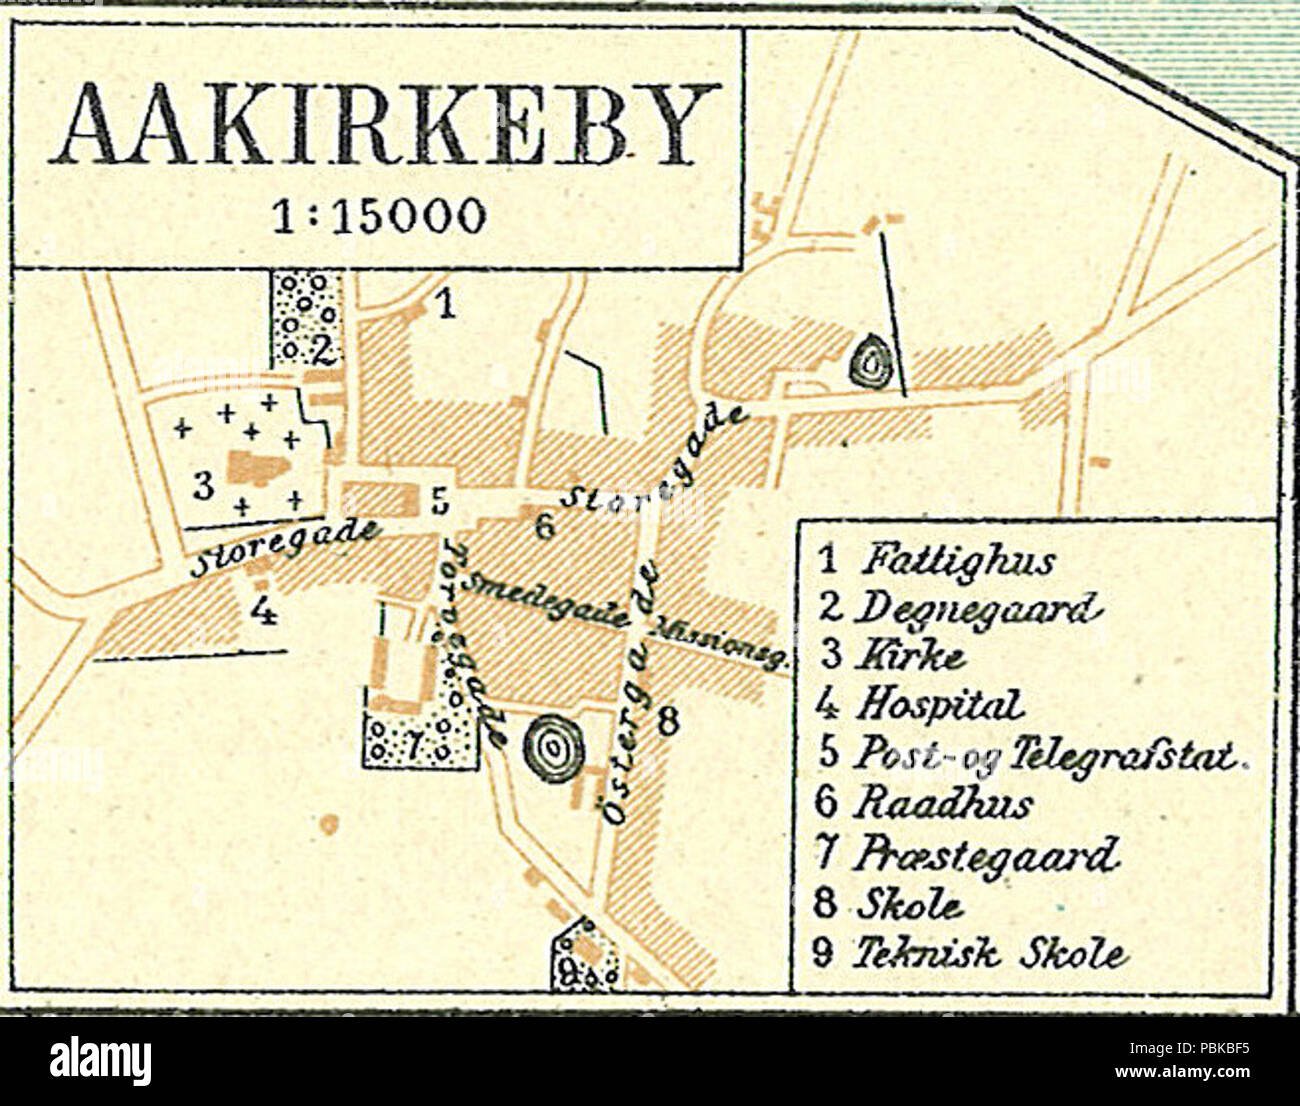 Aakirkeby 1900 (cropped). Stock Photo